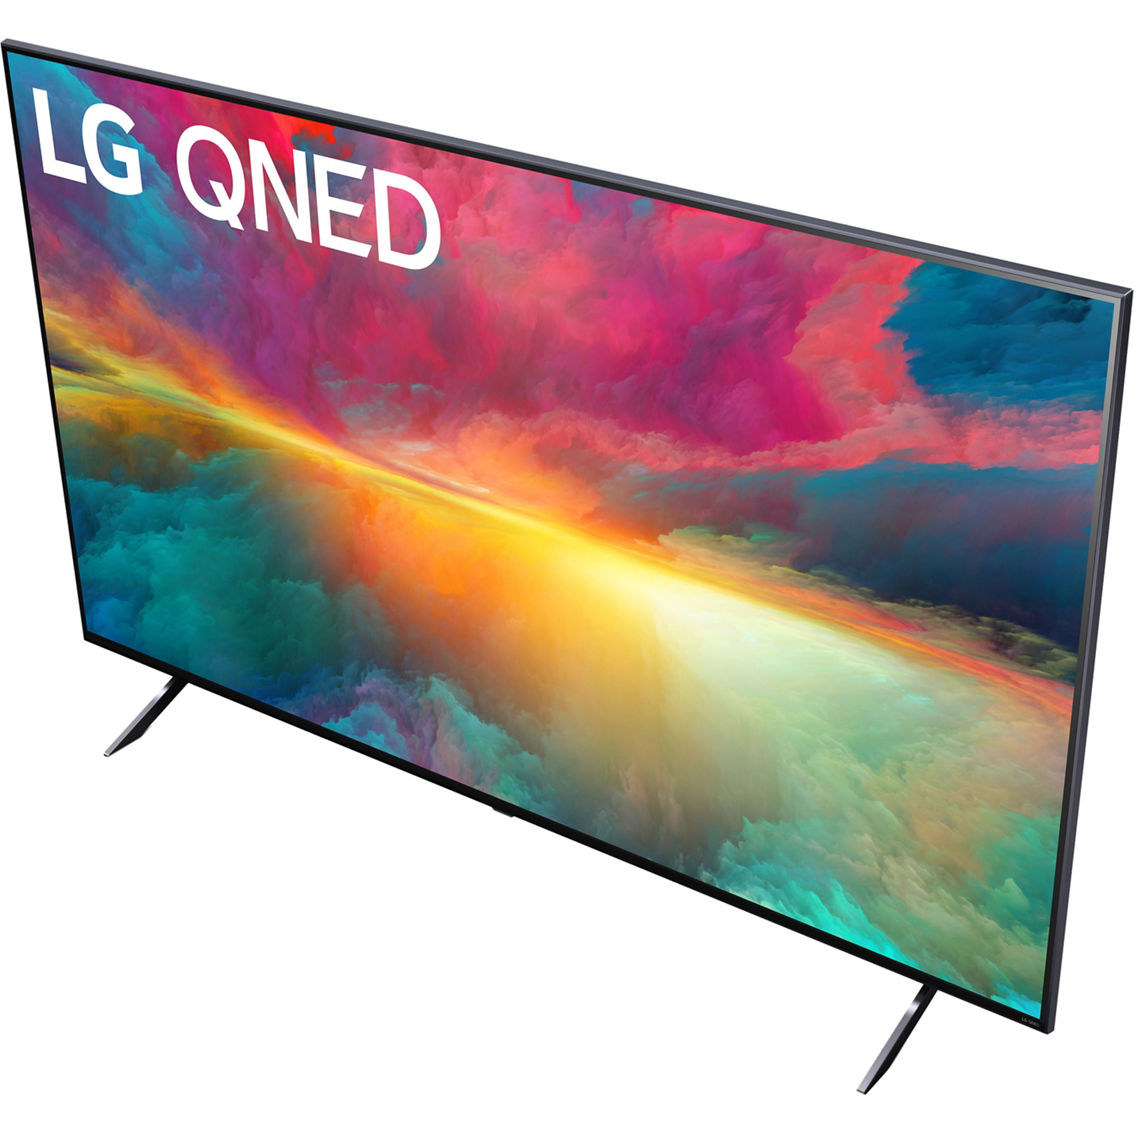 LG 75 in. QNED 4K HDR Smart TV with AI ThinQ 75QNED75URA - Image 5 of 10